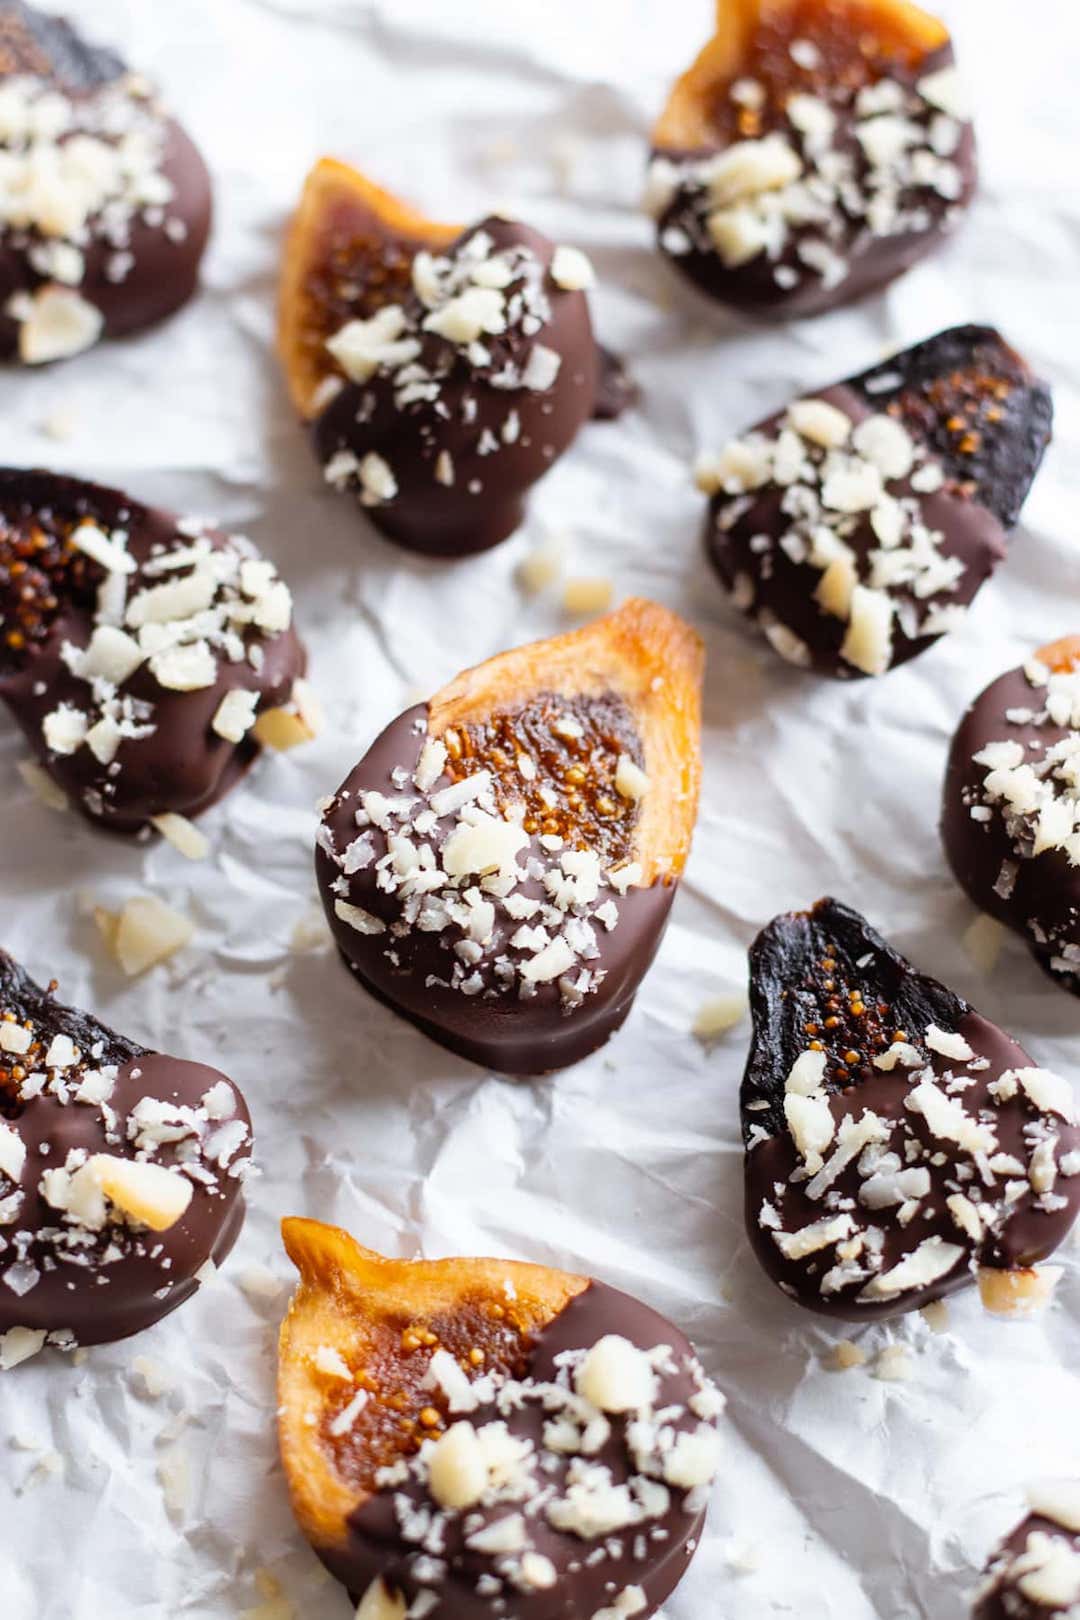 Chocolate Dipped Figs - 18 Delicious Low Fodmap Snacks